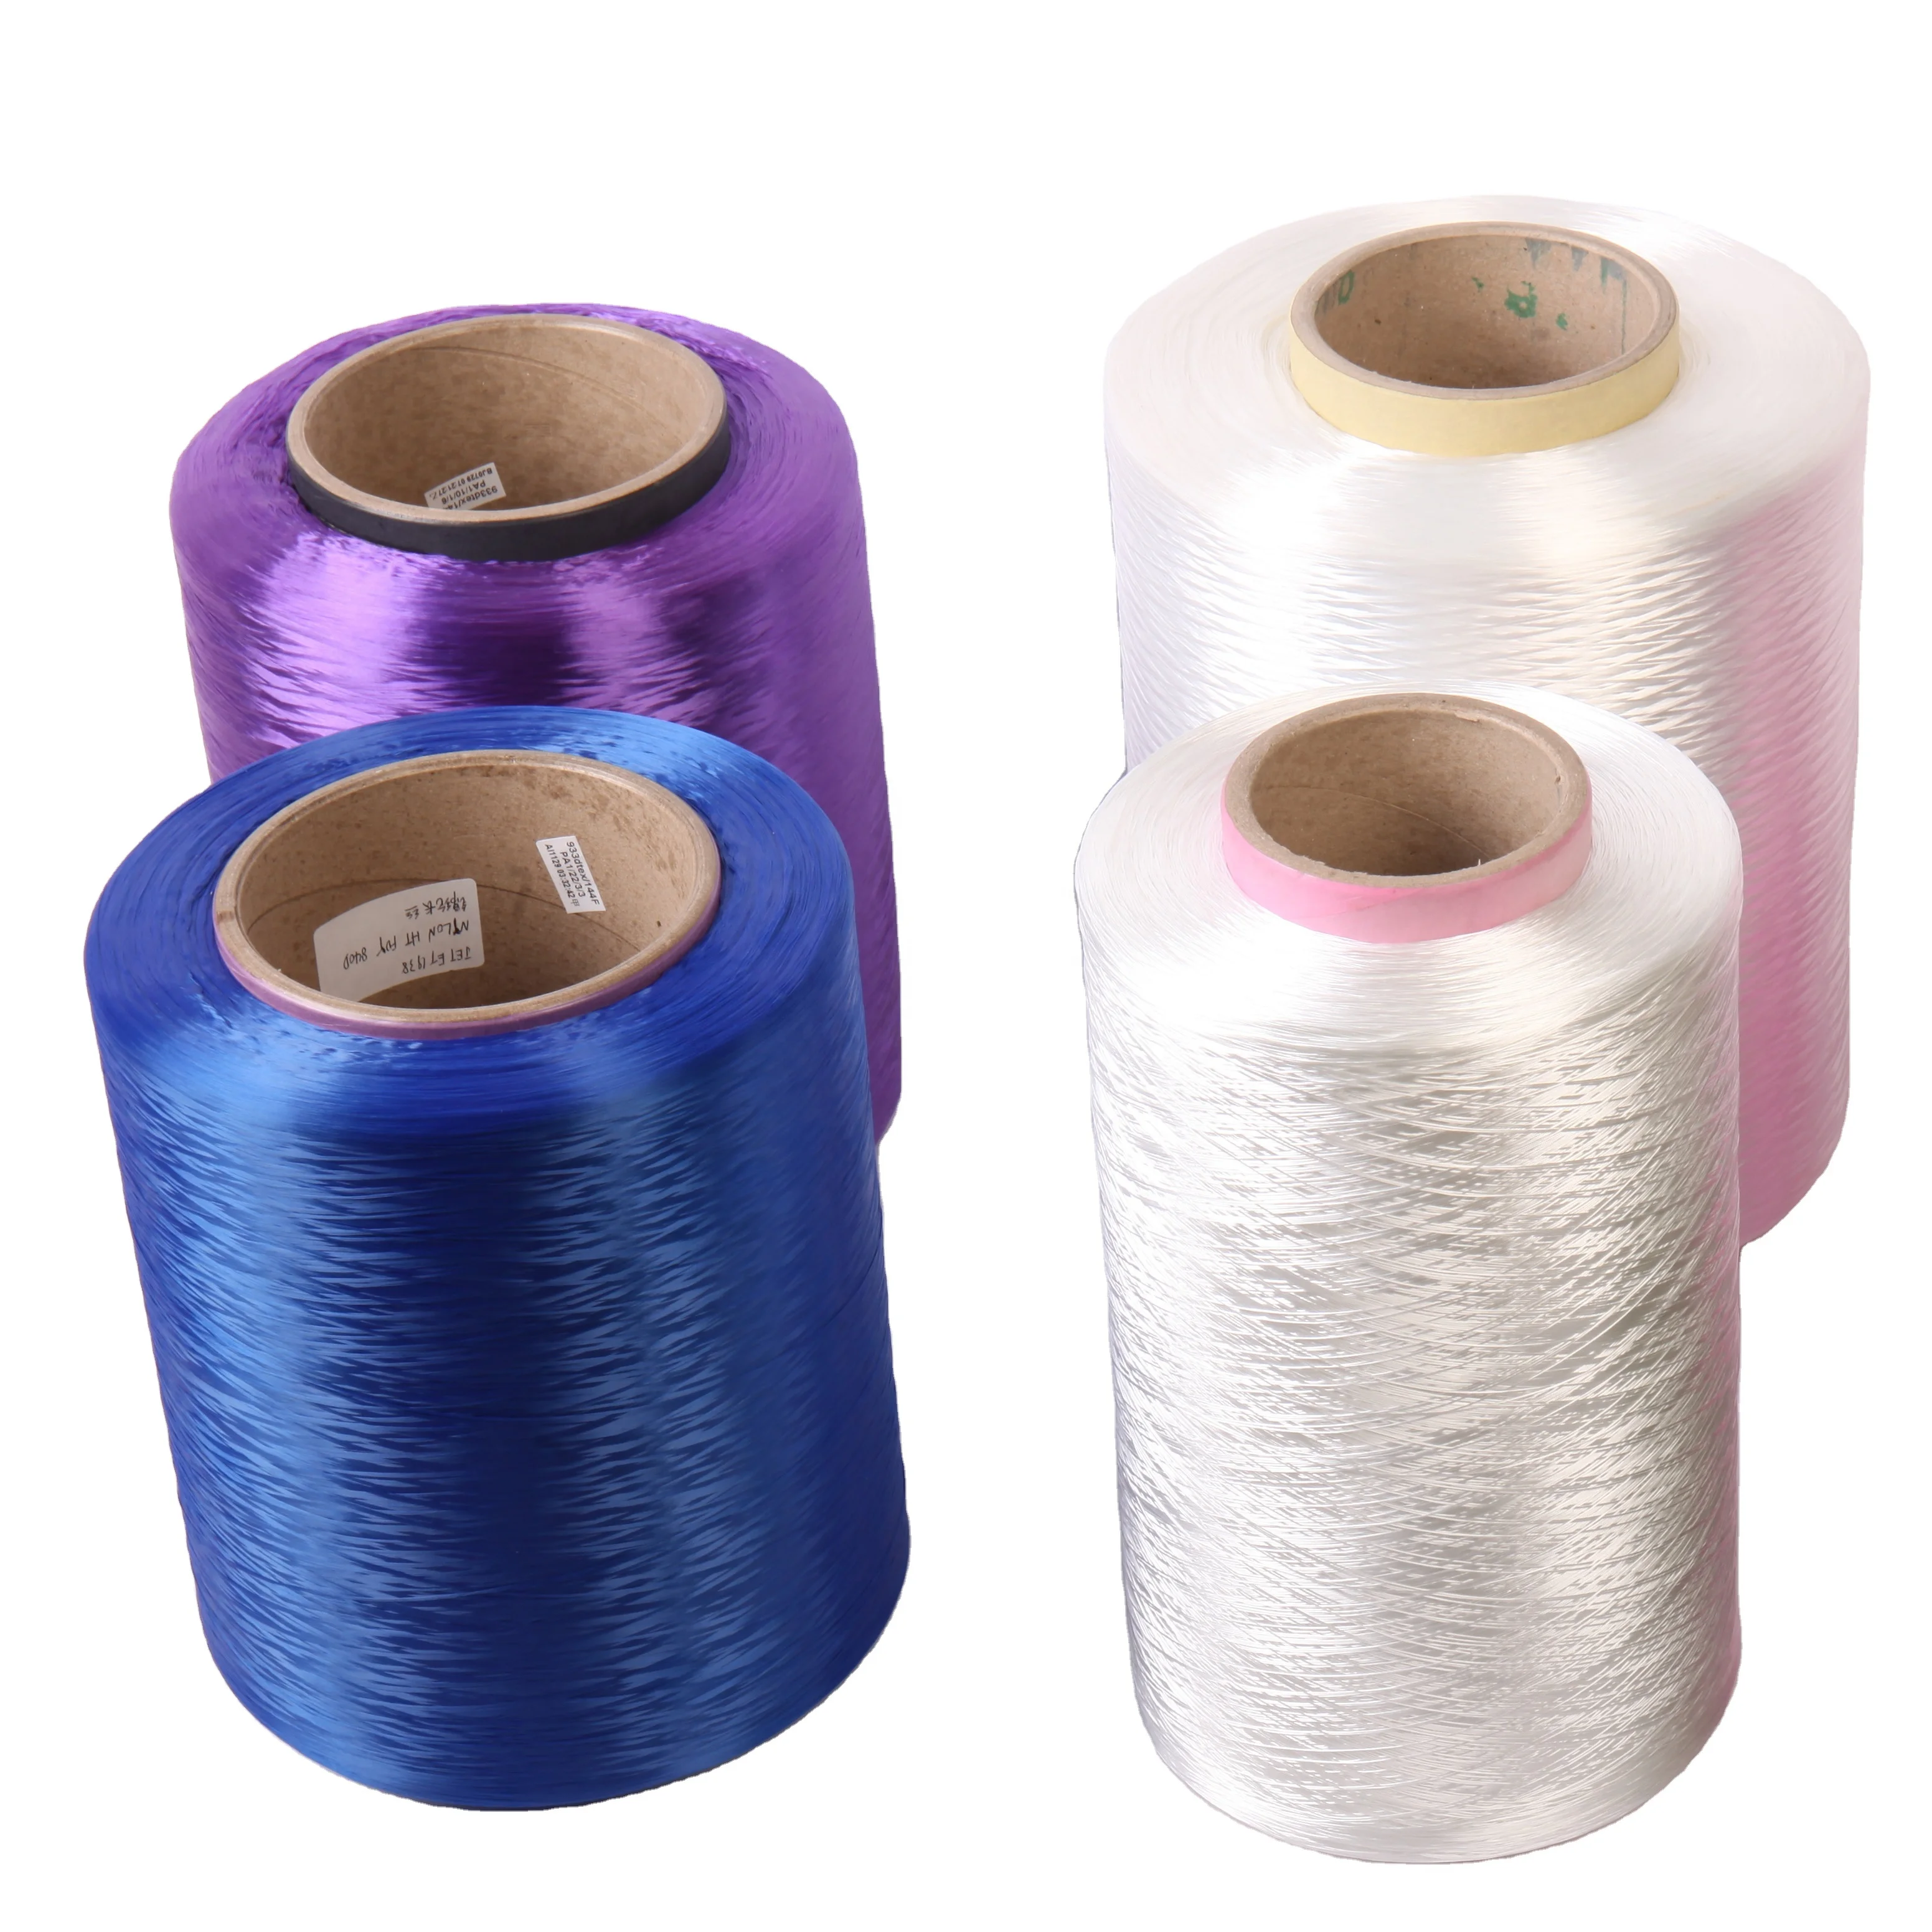 2100dtex nylon 6 ht yarns 7g/d nylon 6 filament yarn with different colors on sale